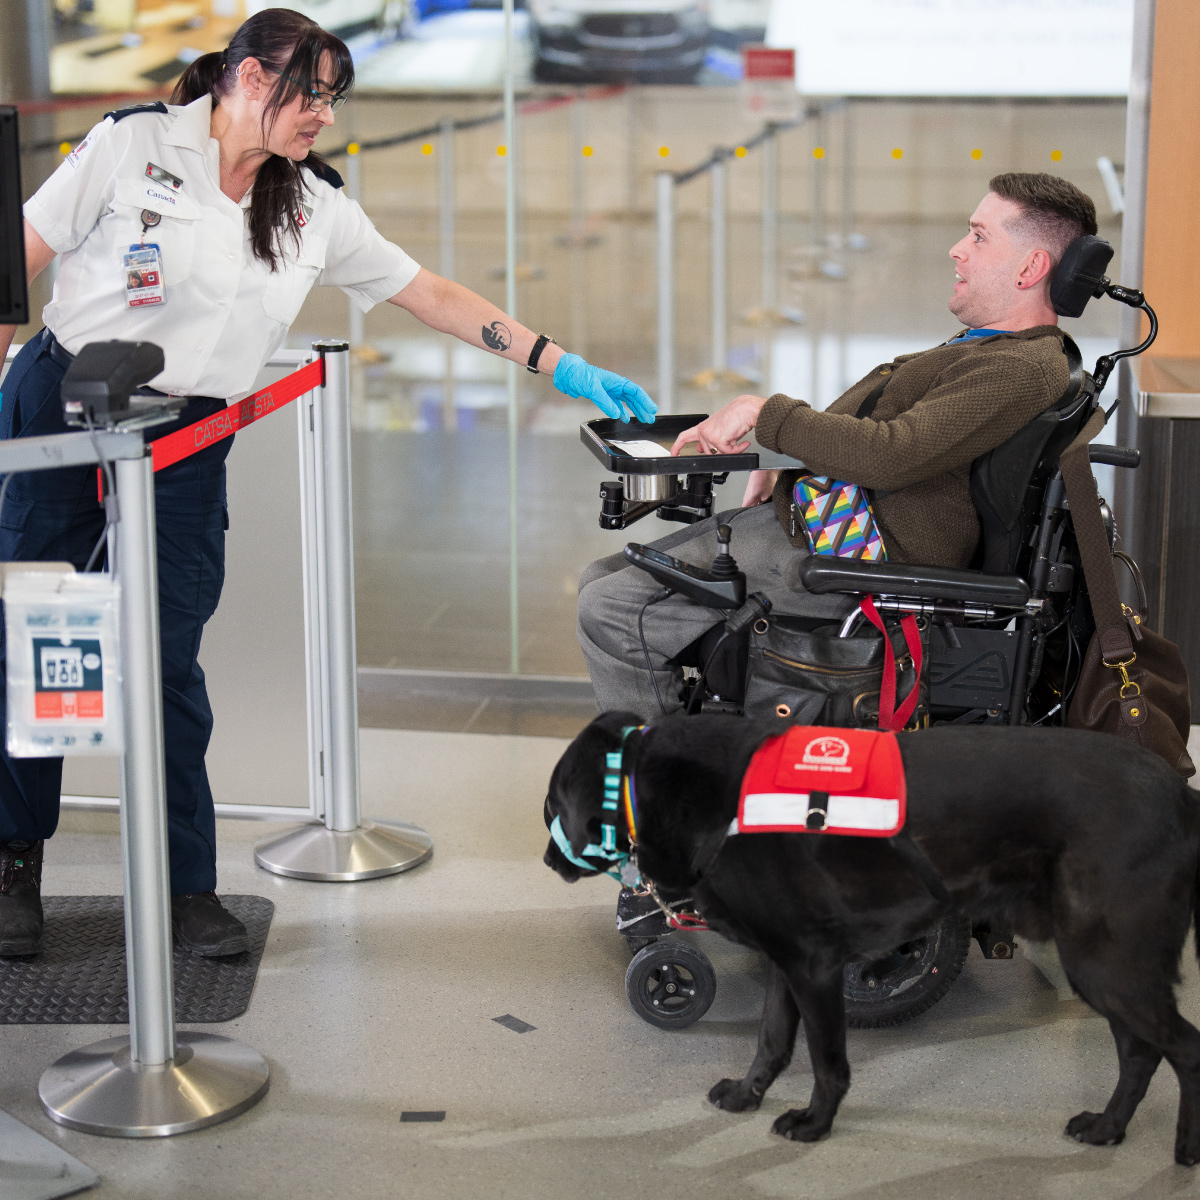 Need help at security screening? Our officers are ready to assist! To learn more, visit our Special Needs page. Safe travels! ✈️  

👉 Learn More: ow.ly/TBKY50REPkx  
🛫 #Prepare2Fly